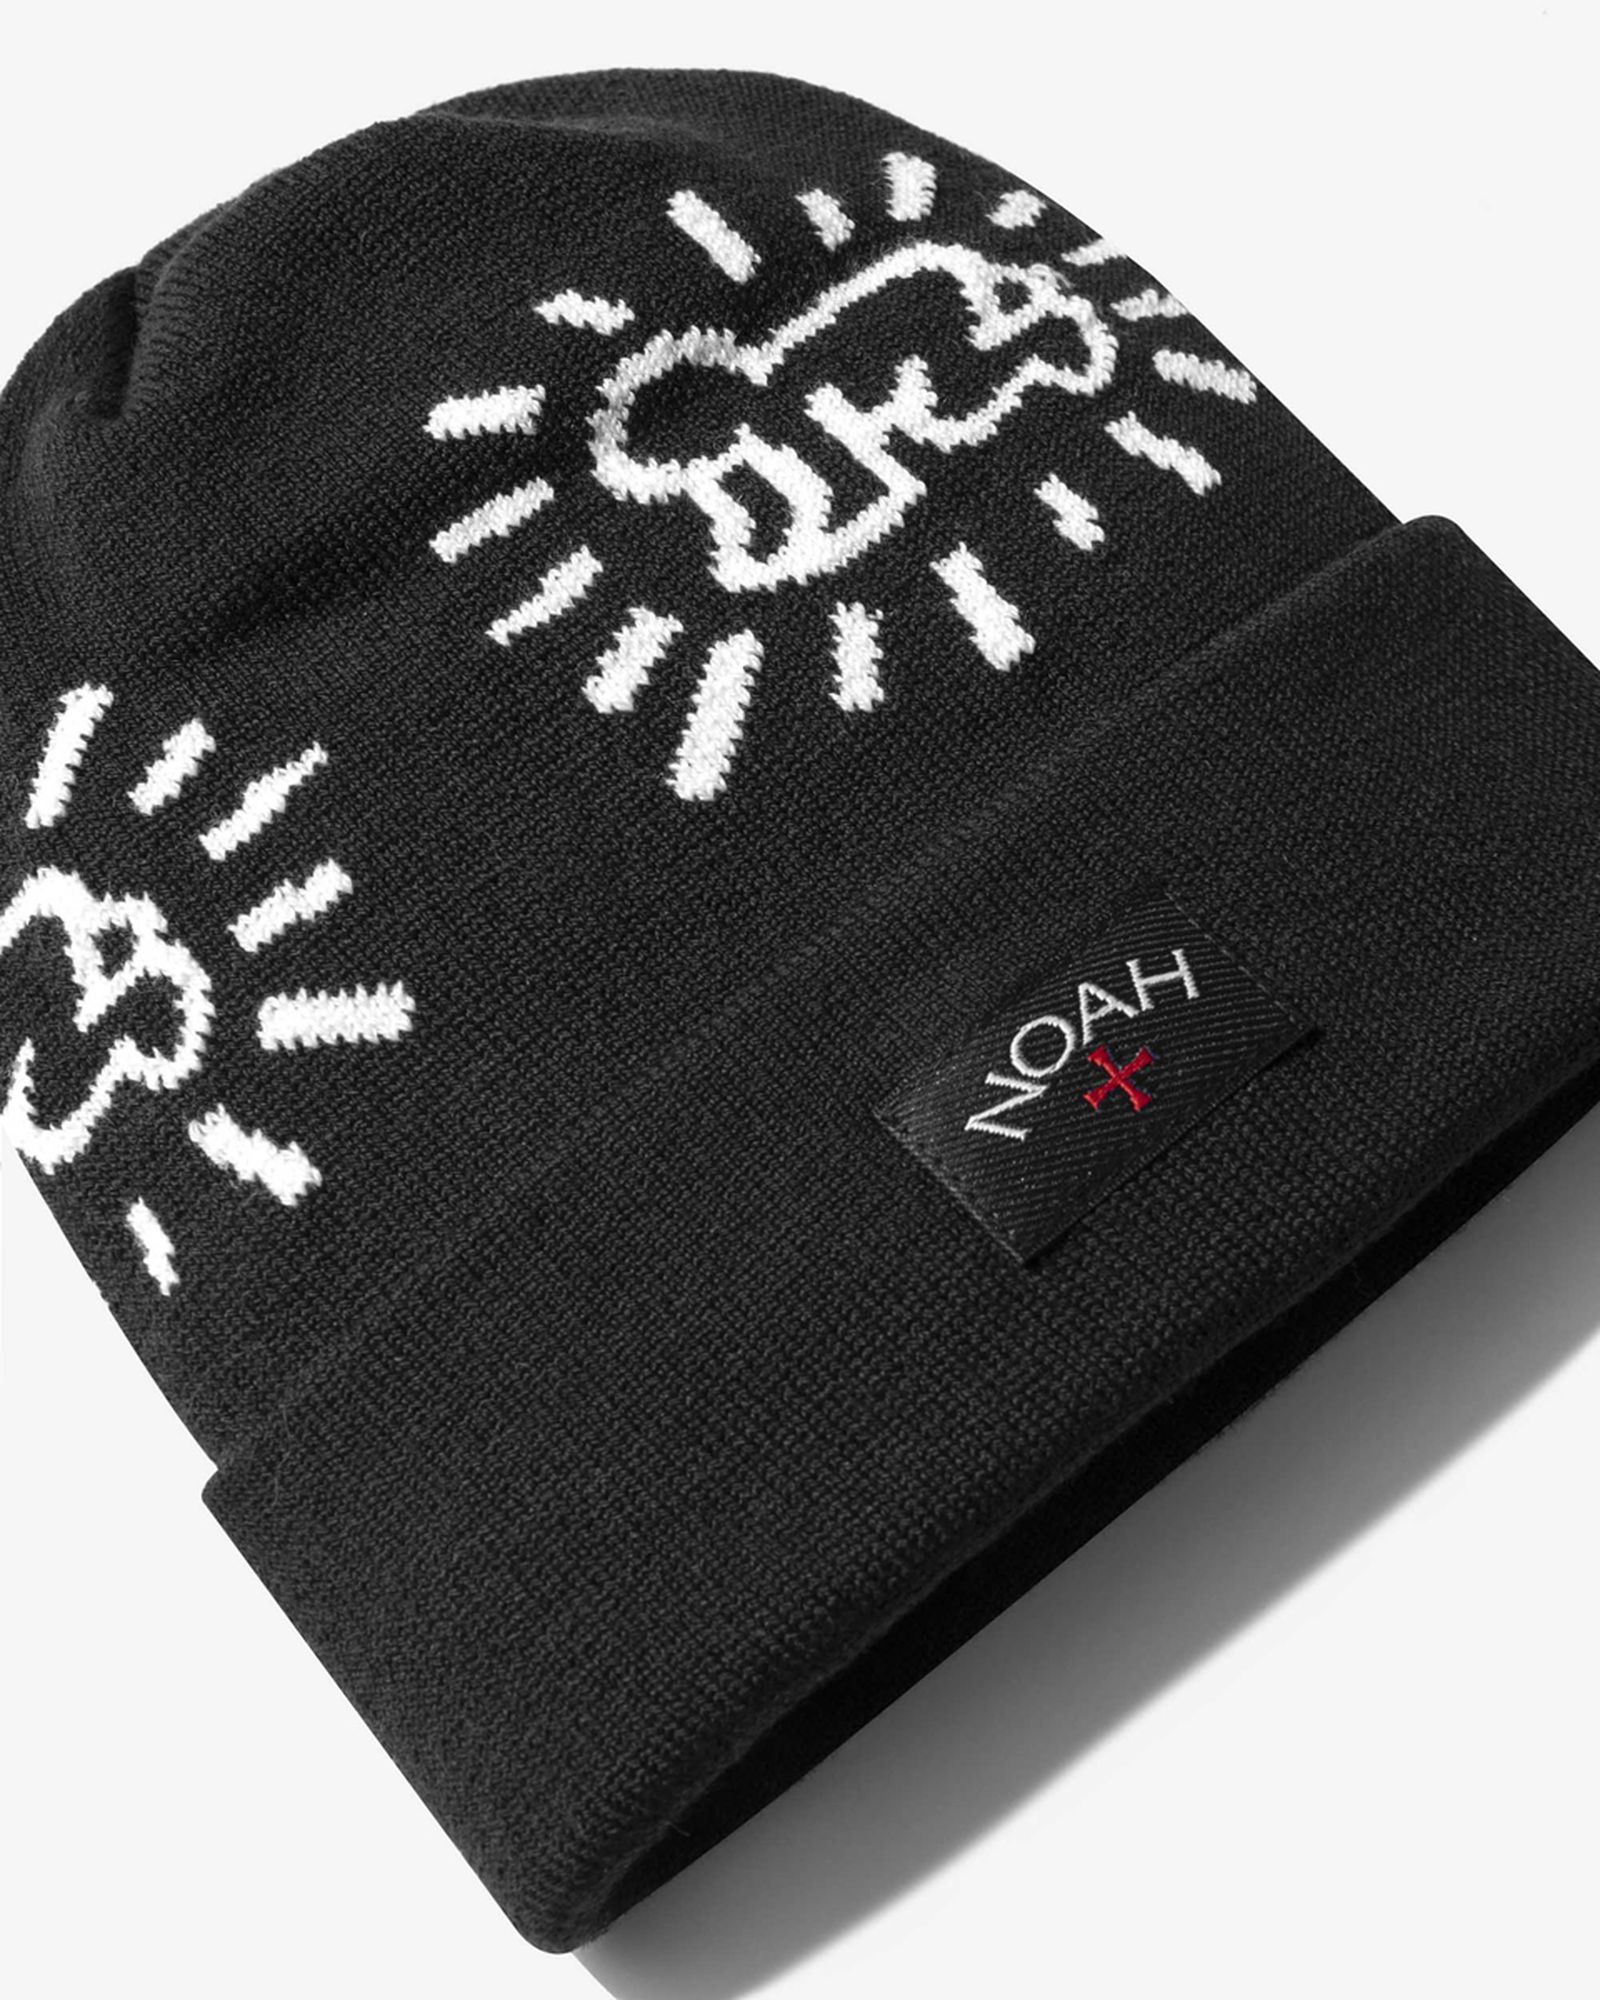 noah-keith-haring-charity-collab-collection (11)